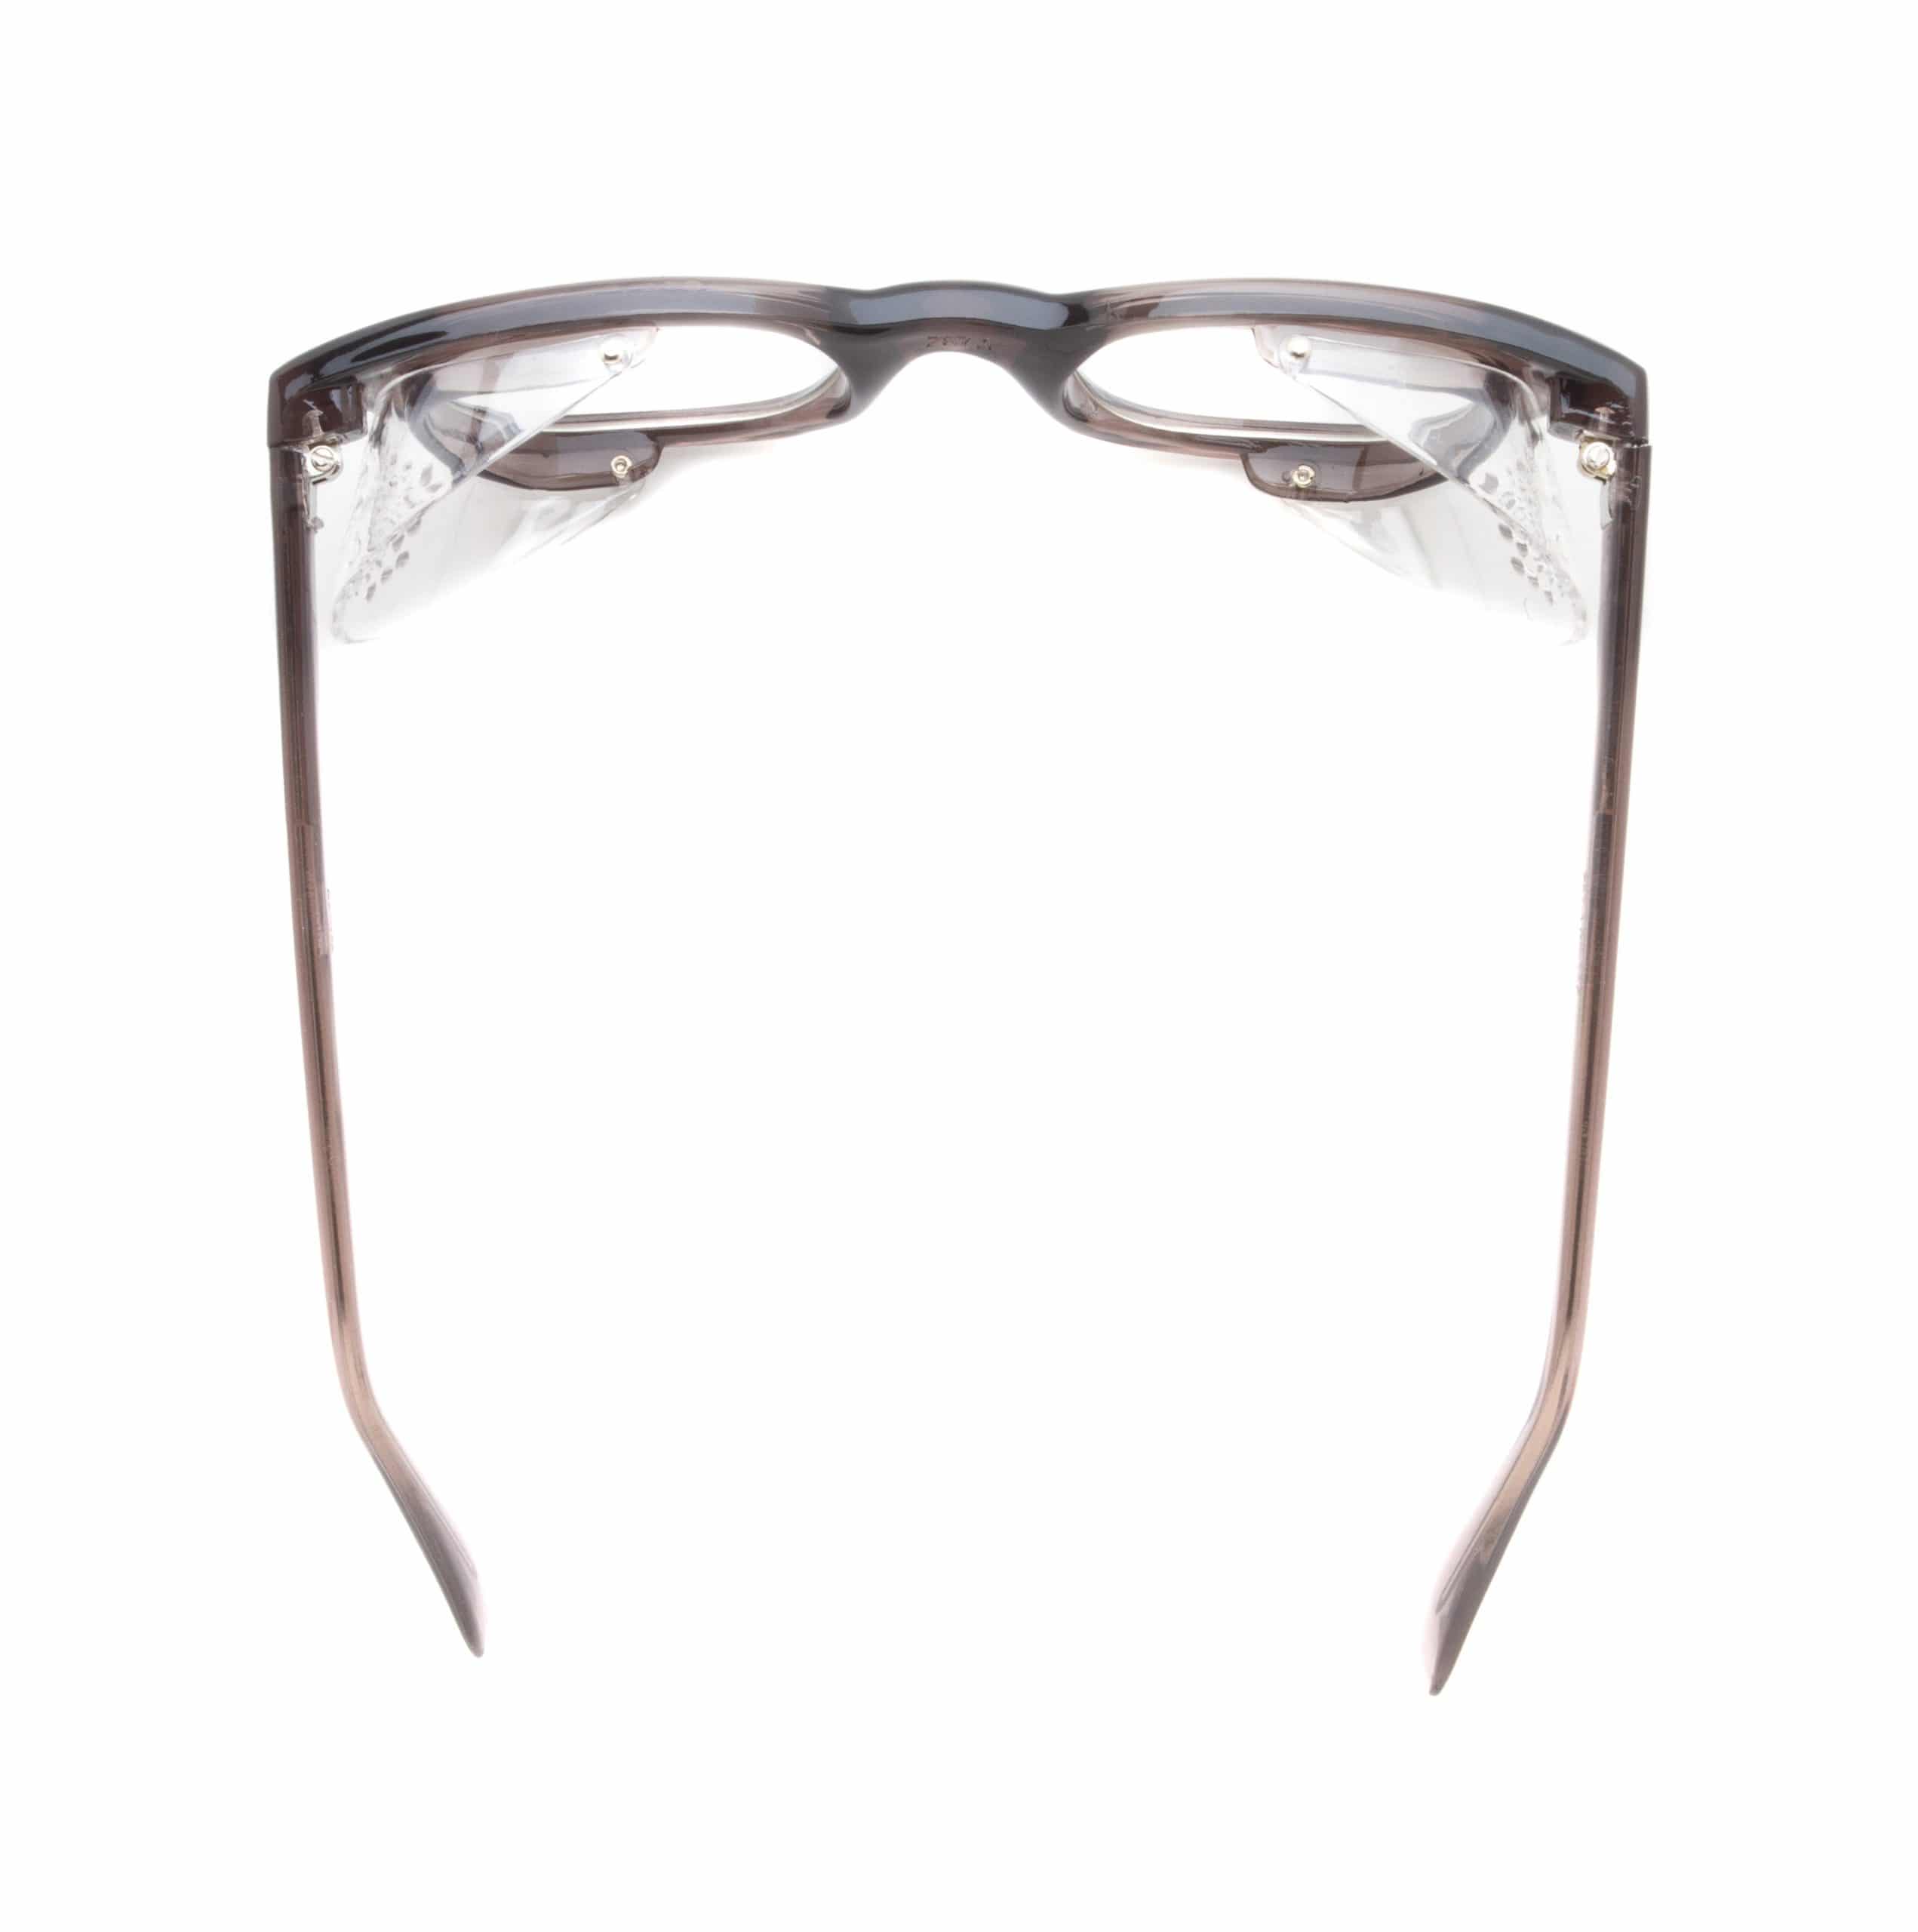 Best Looking Prescription Safety Glasses